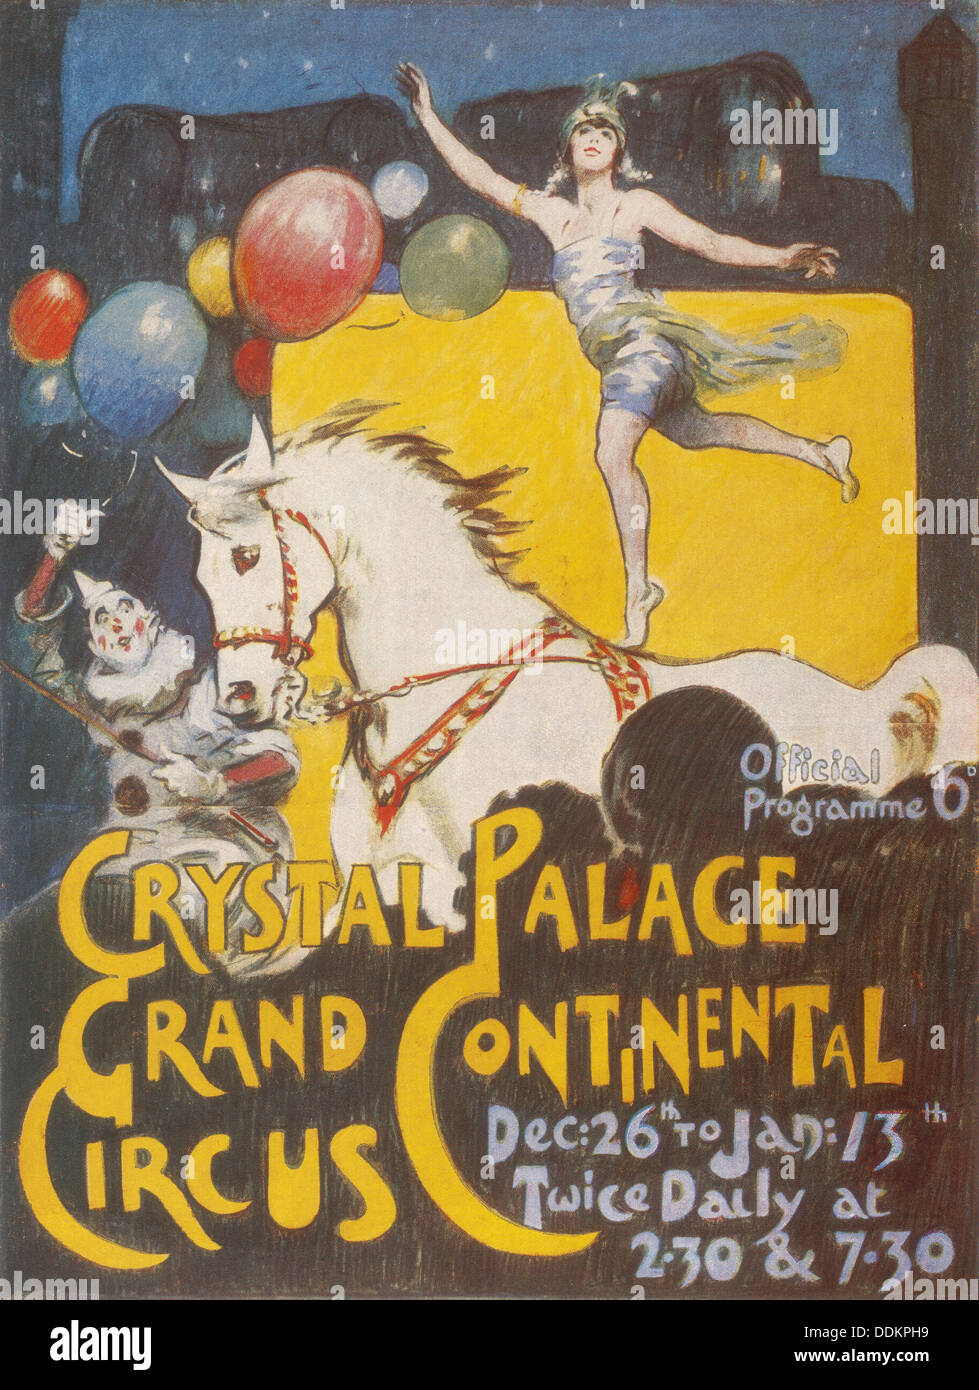 Advertisement for the Grand Continental Circus at Crystal Palace, London, (c1920s?). Artist: Unknown Stock Photo